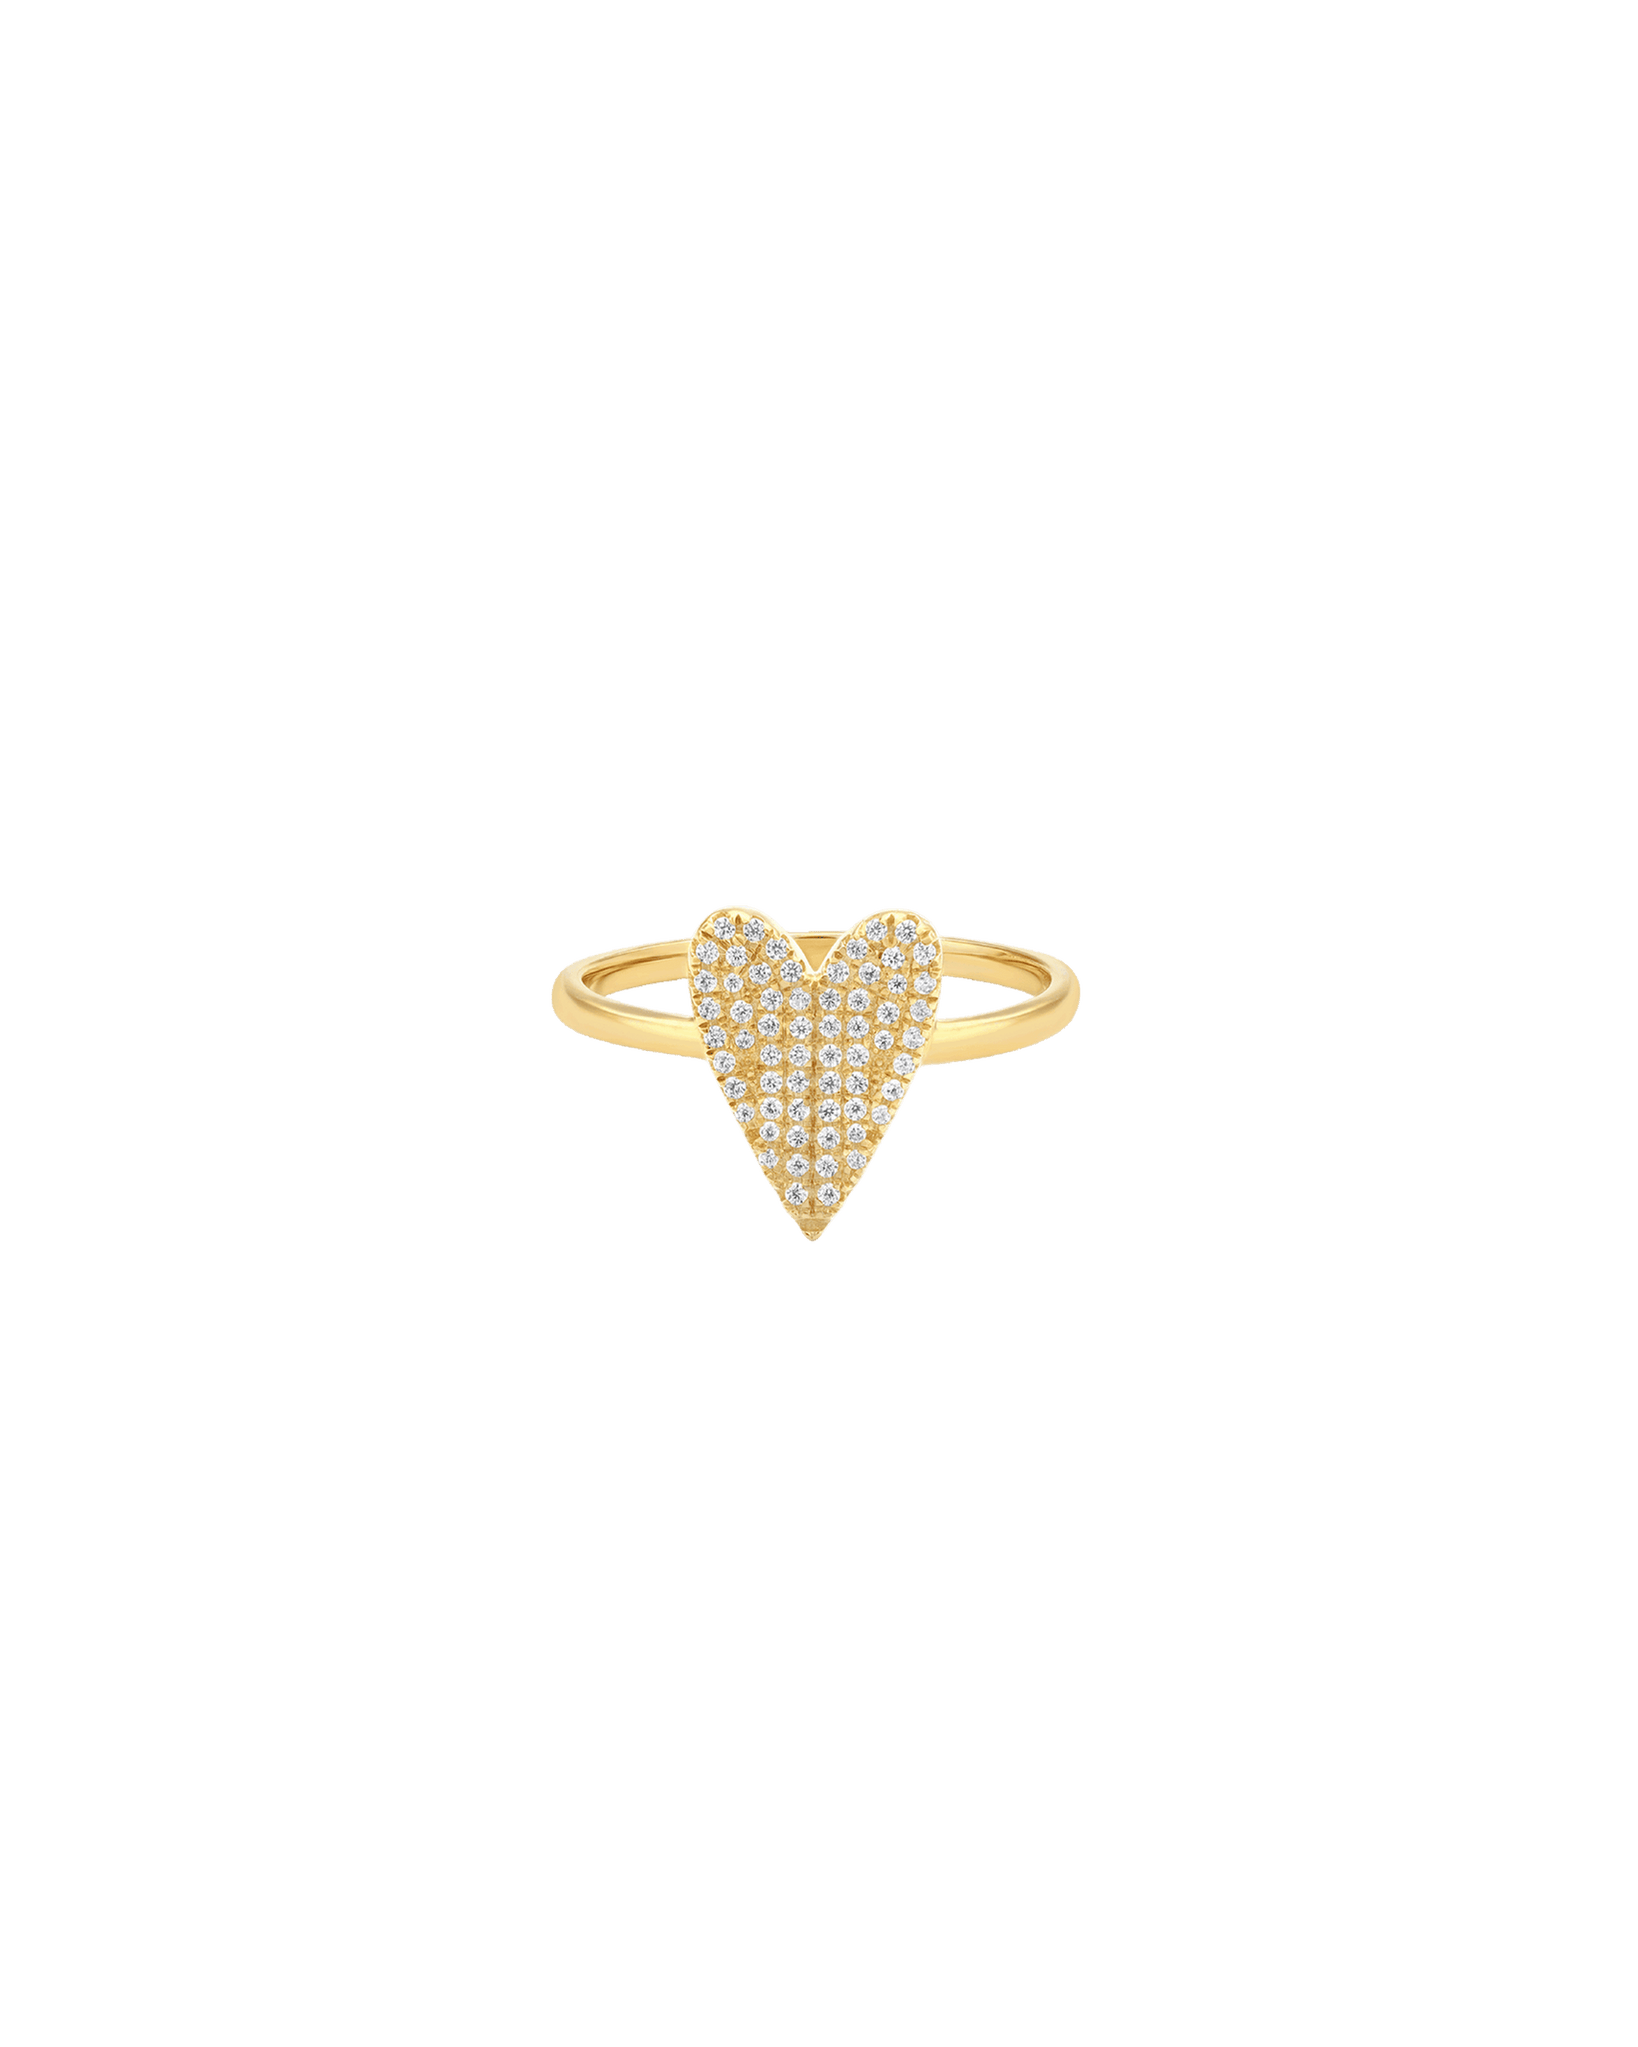 Paved Diamond Heart Ring - 14K Yellow Gold Rings 14K Solid Gold US 4 